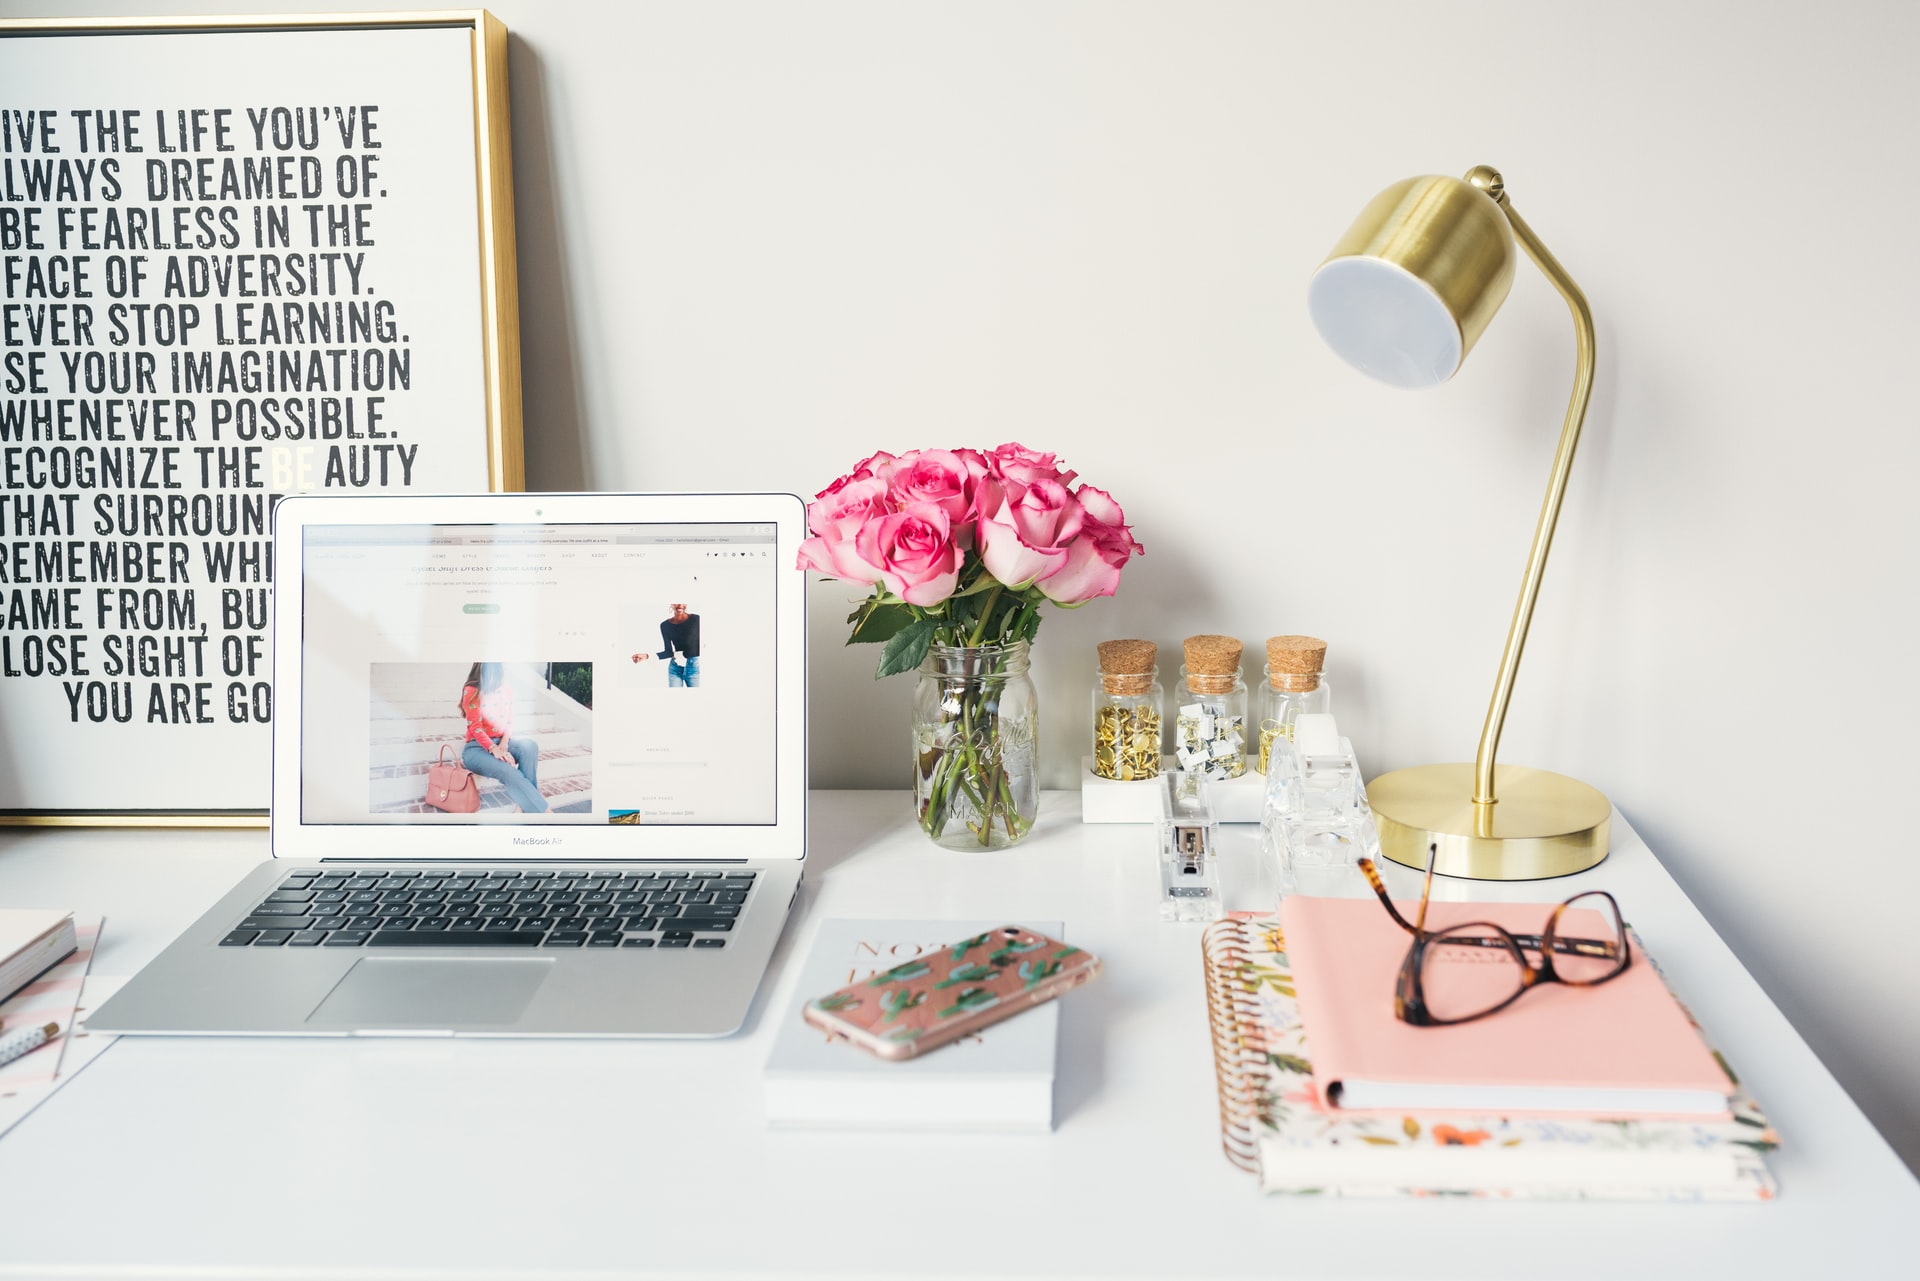 Decorated home office with flowers, picture with quote, lamp, laptop and glasses on notebooks